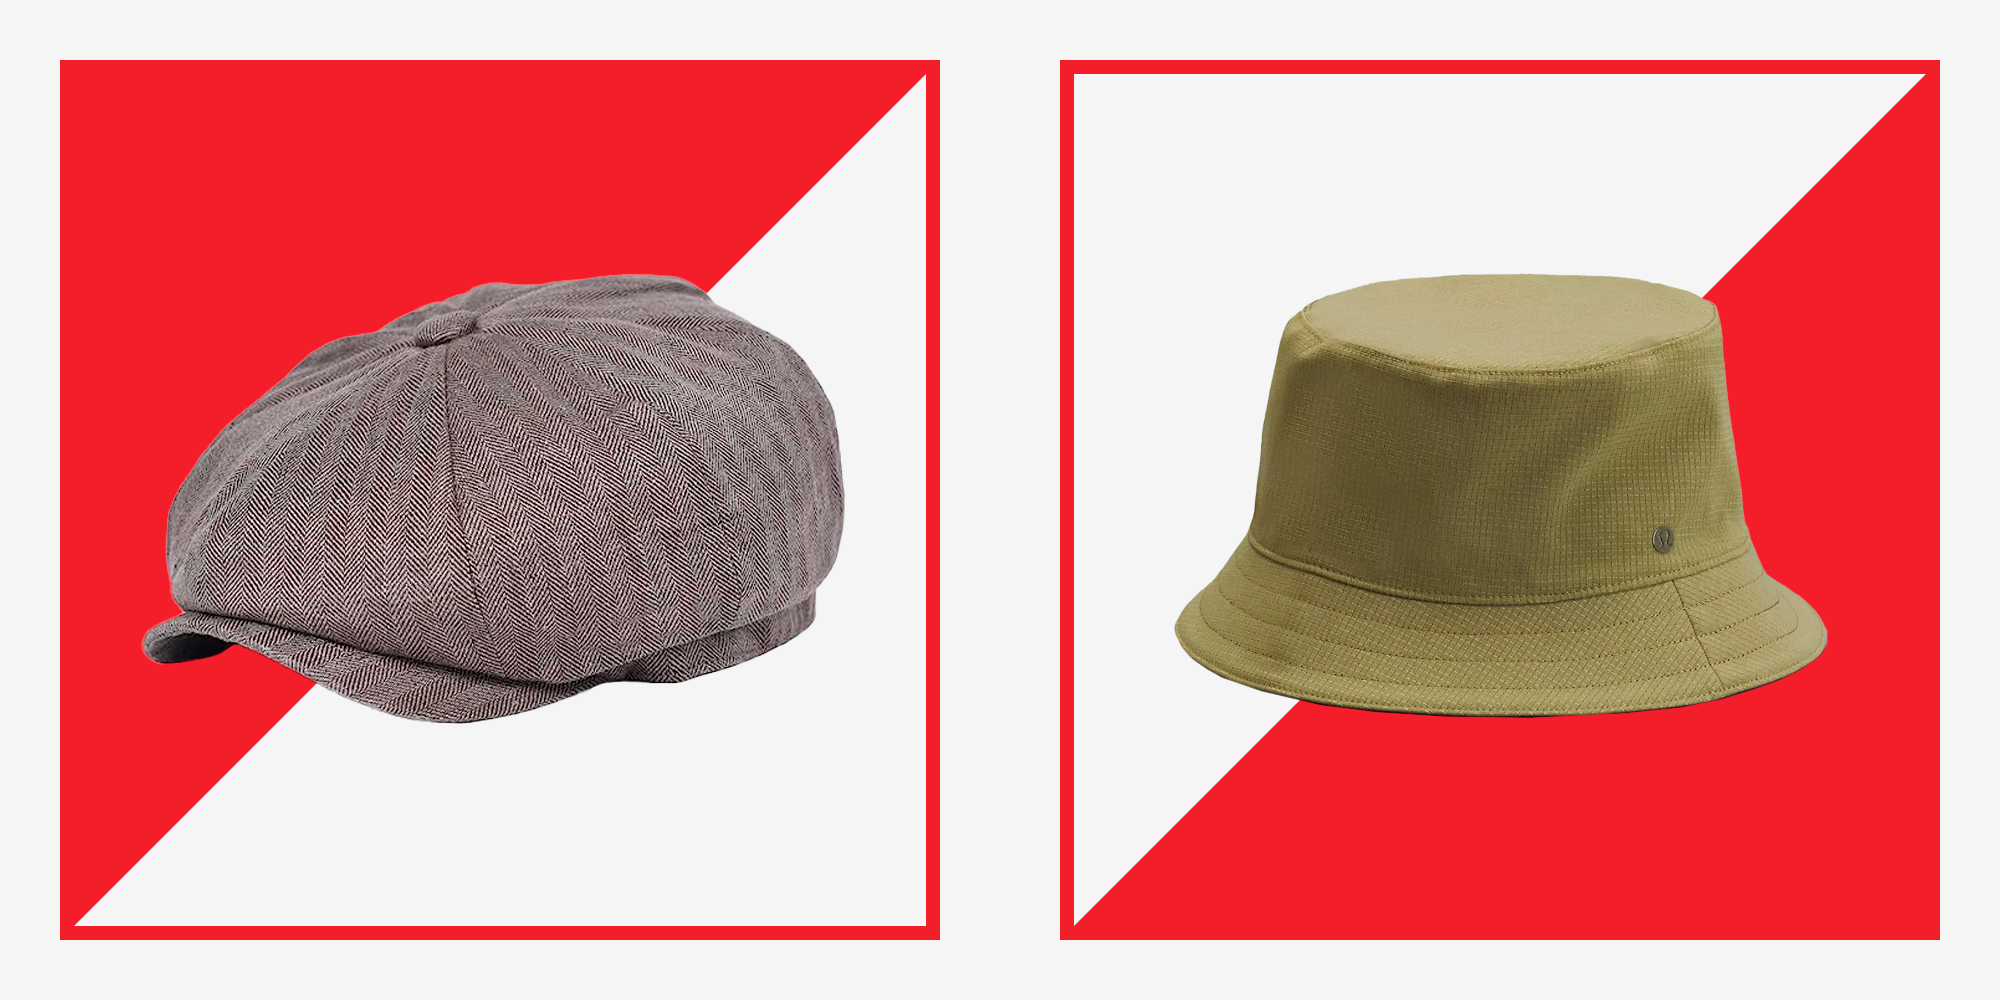 Collection of stylish men's hats of various types - hats, caps